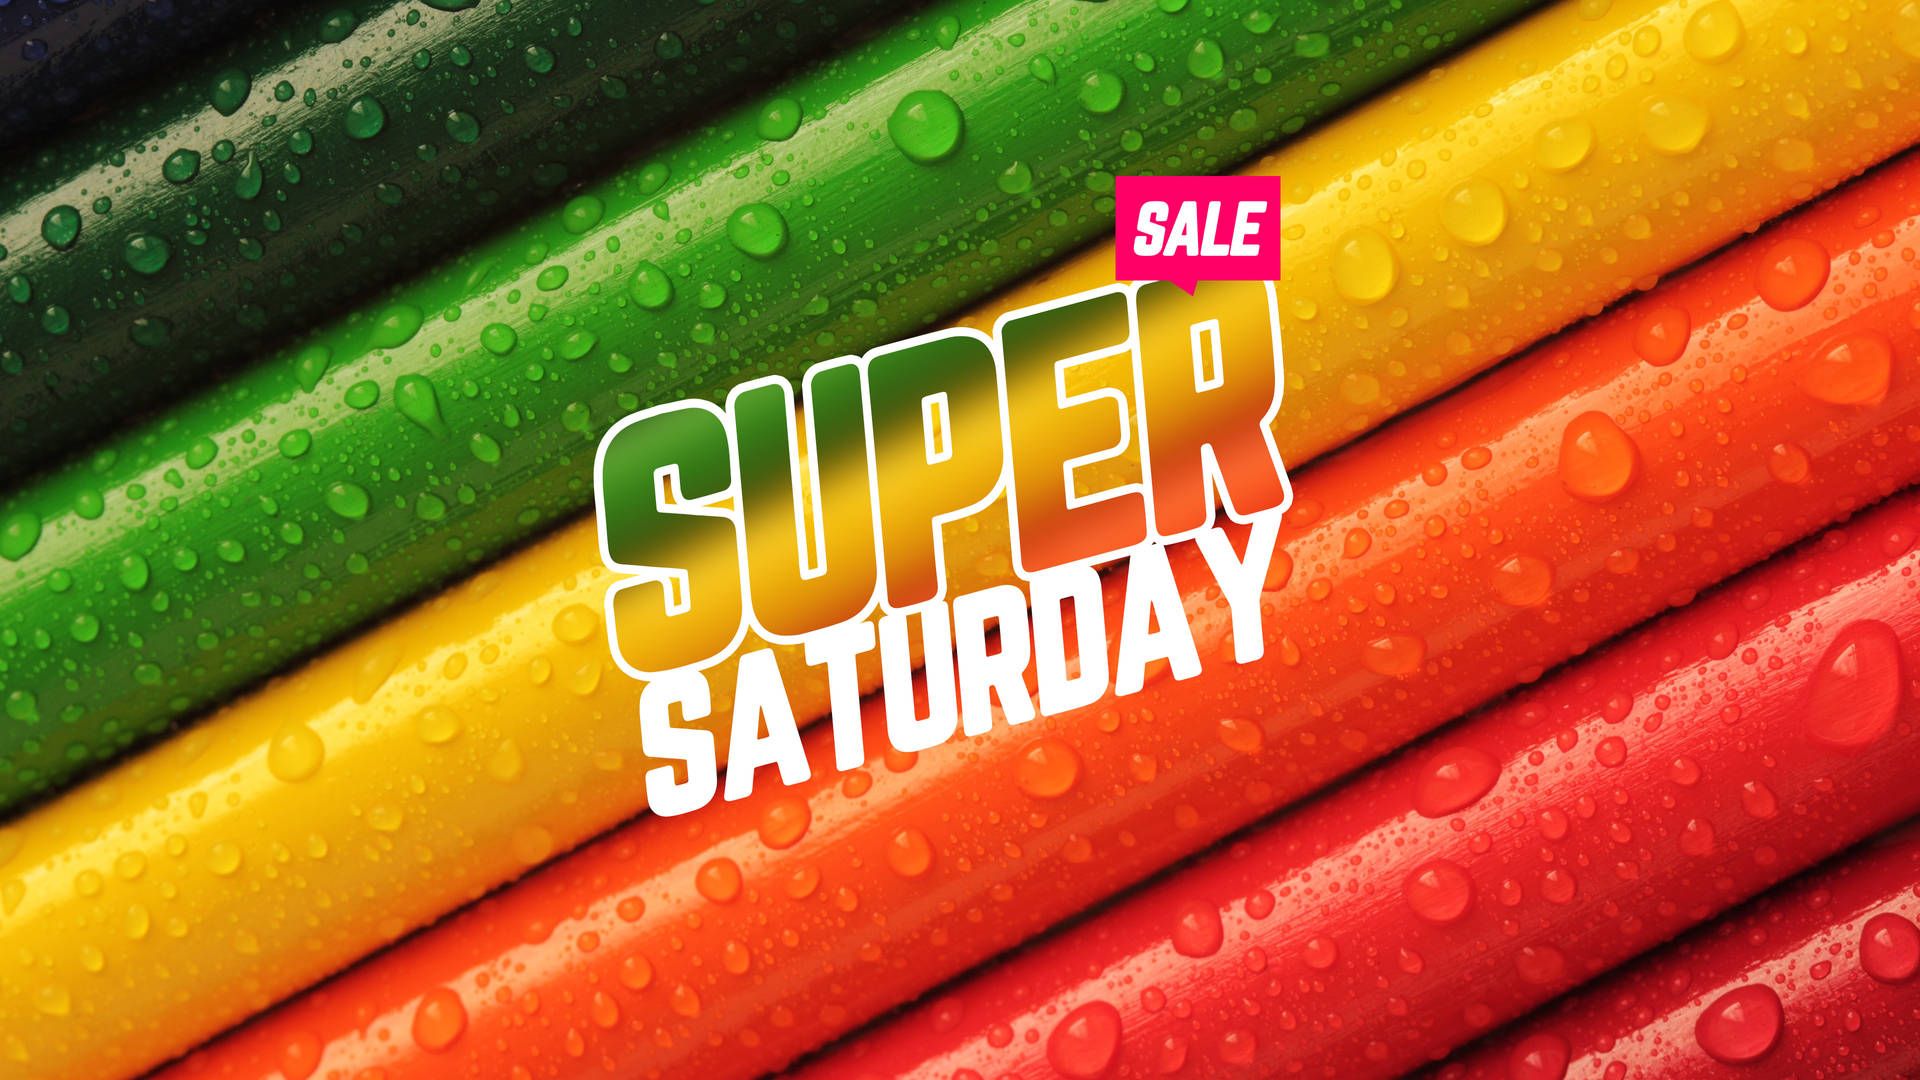 Misty Crayons Super Saturday Sale Event Background